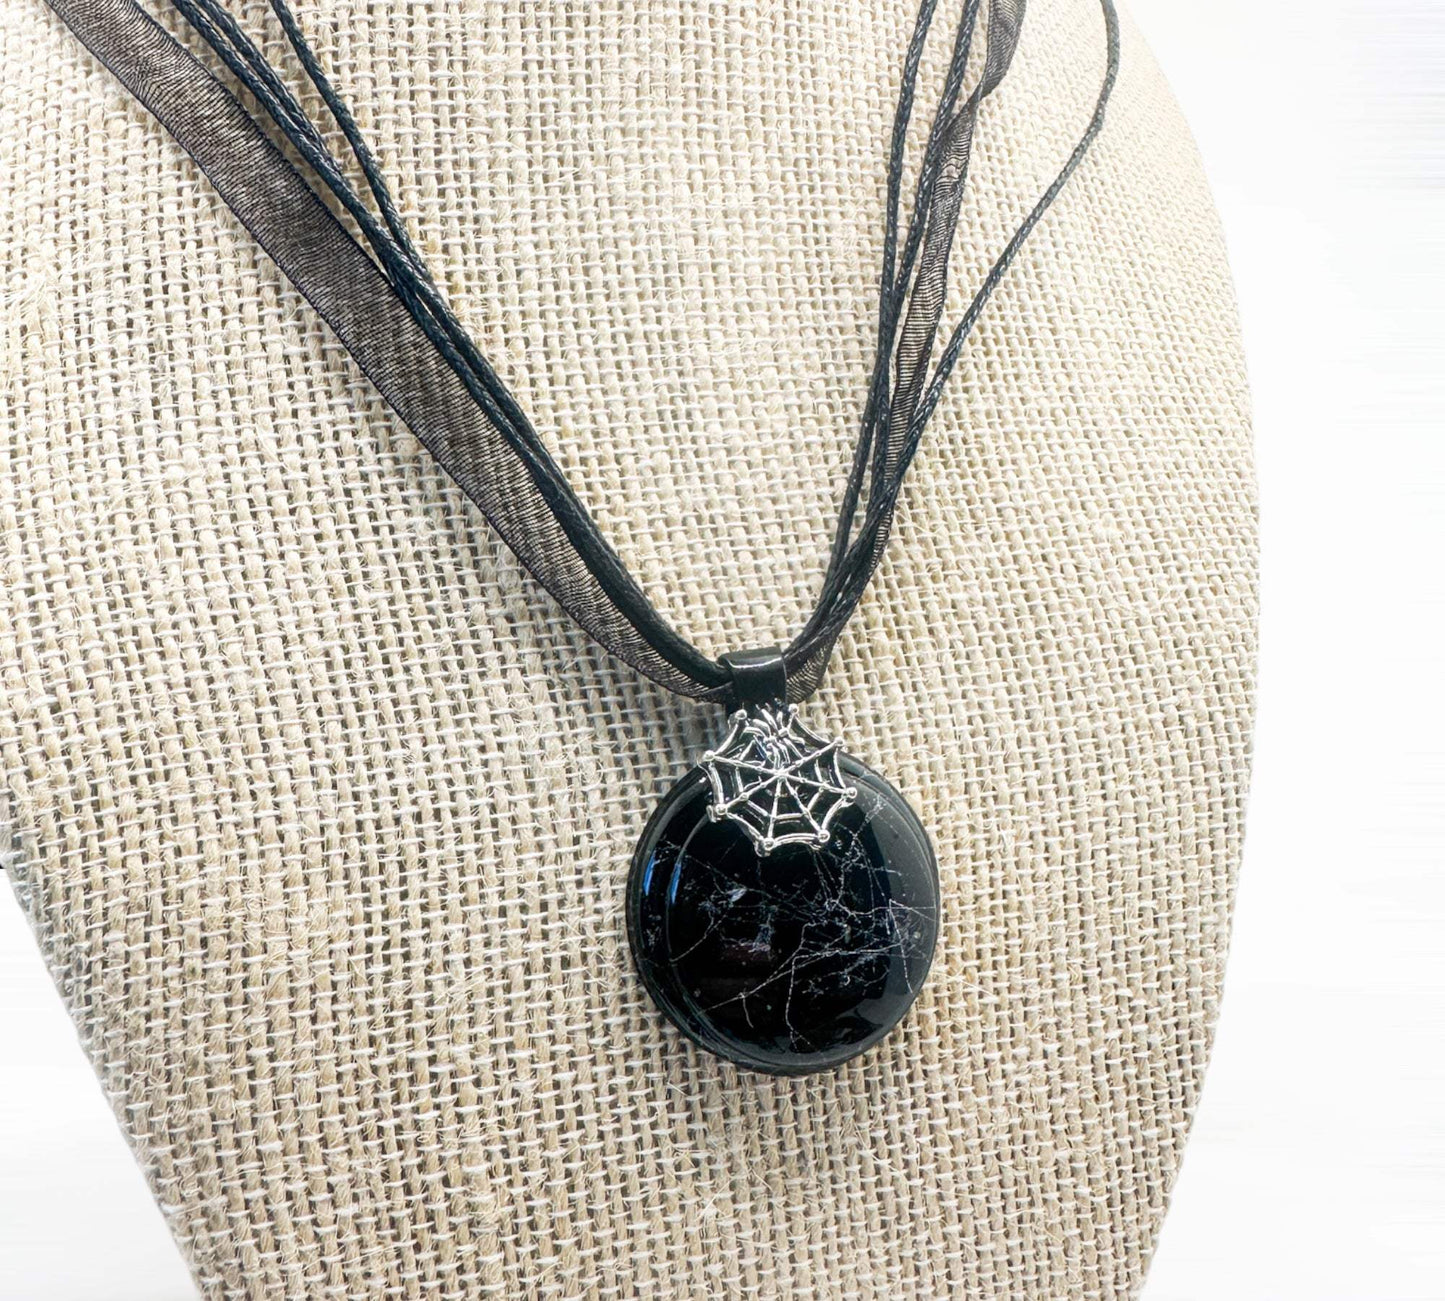 Spiderweb -Inspired Resin Pendant Necklace- Nature's Beauty on Display